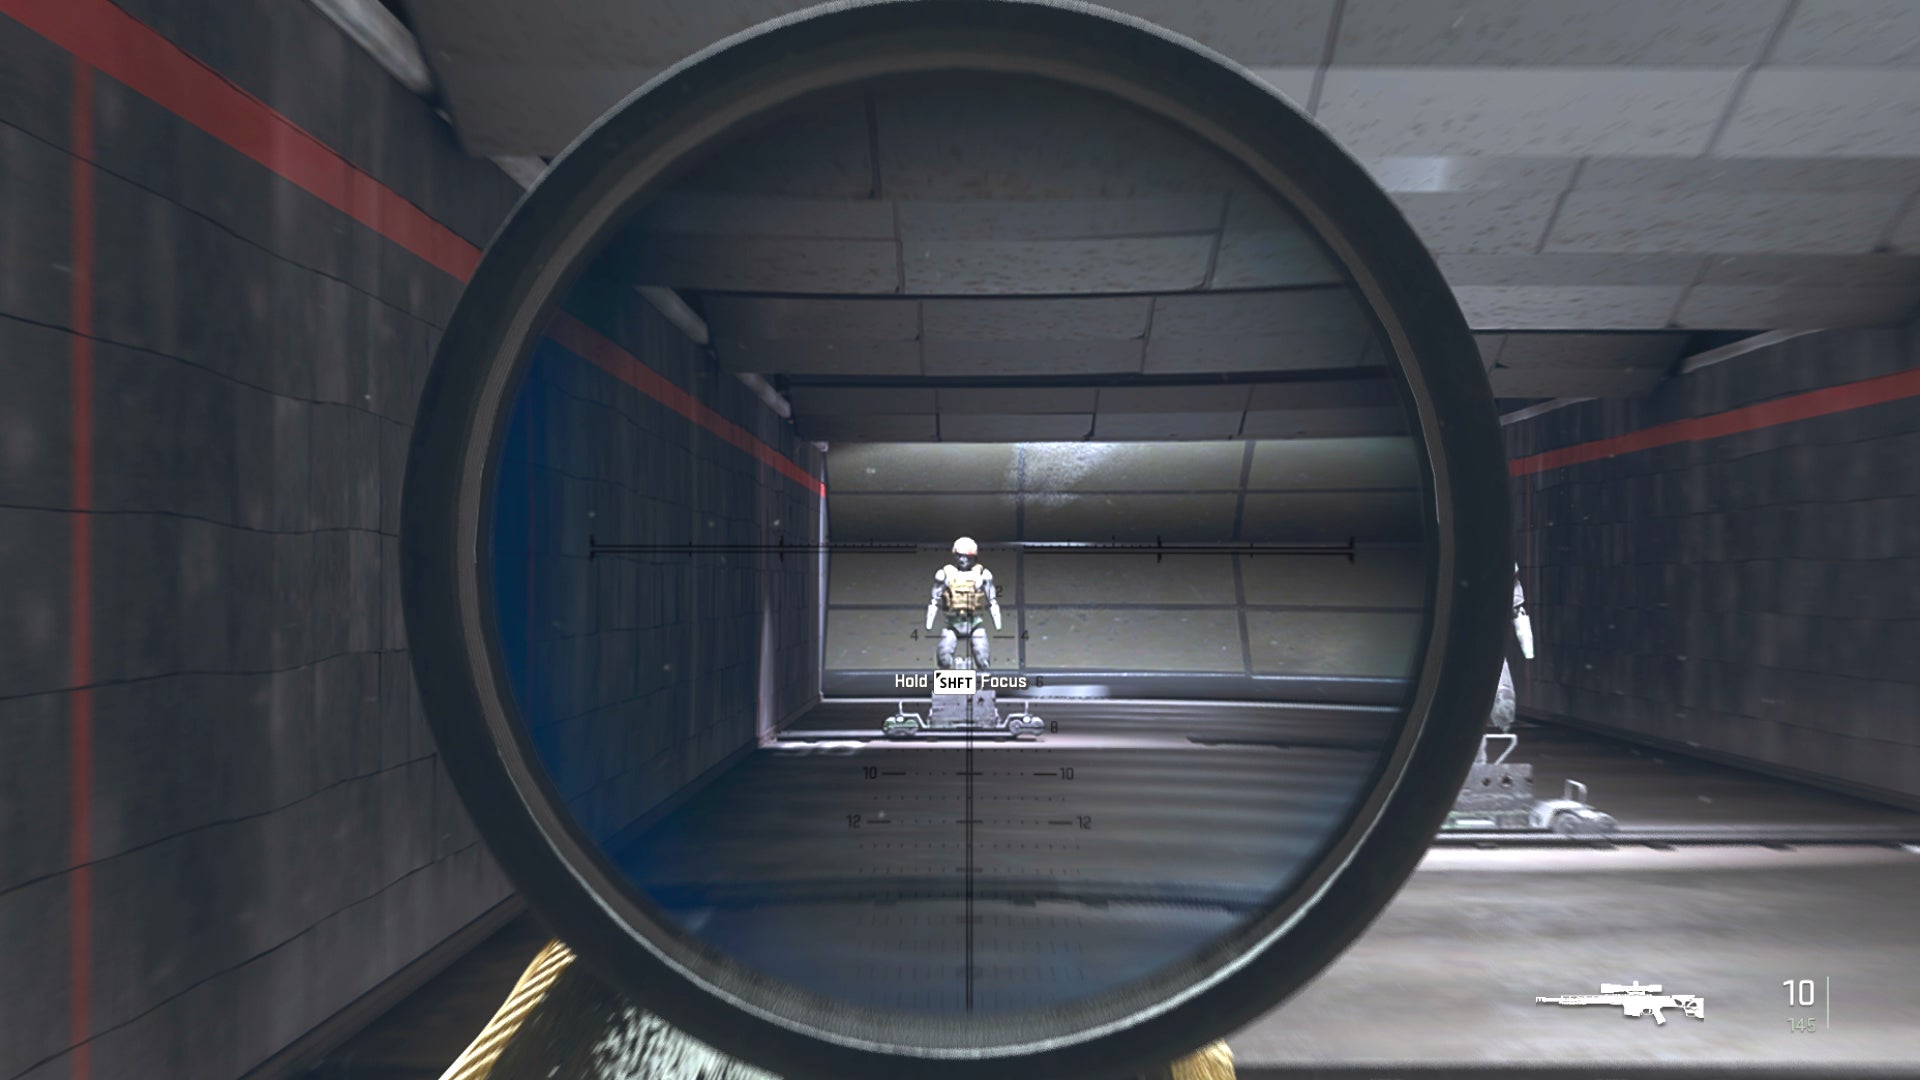 The player in Warzone 2.0 aims at a training dummy with the MCPR-300 default scope.